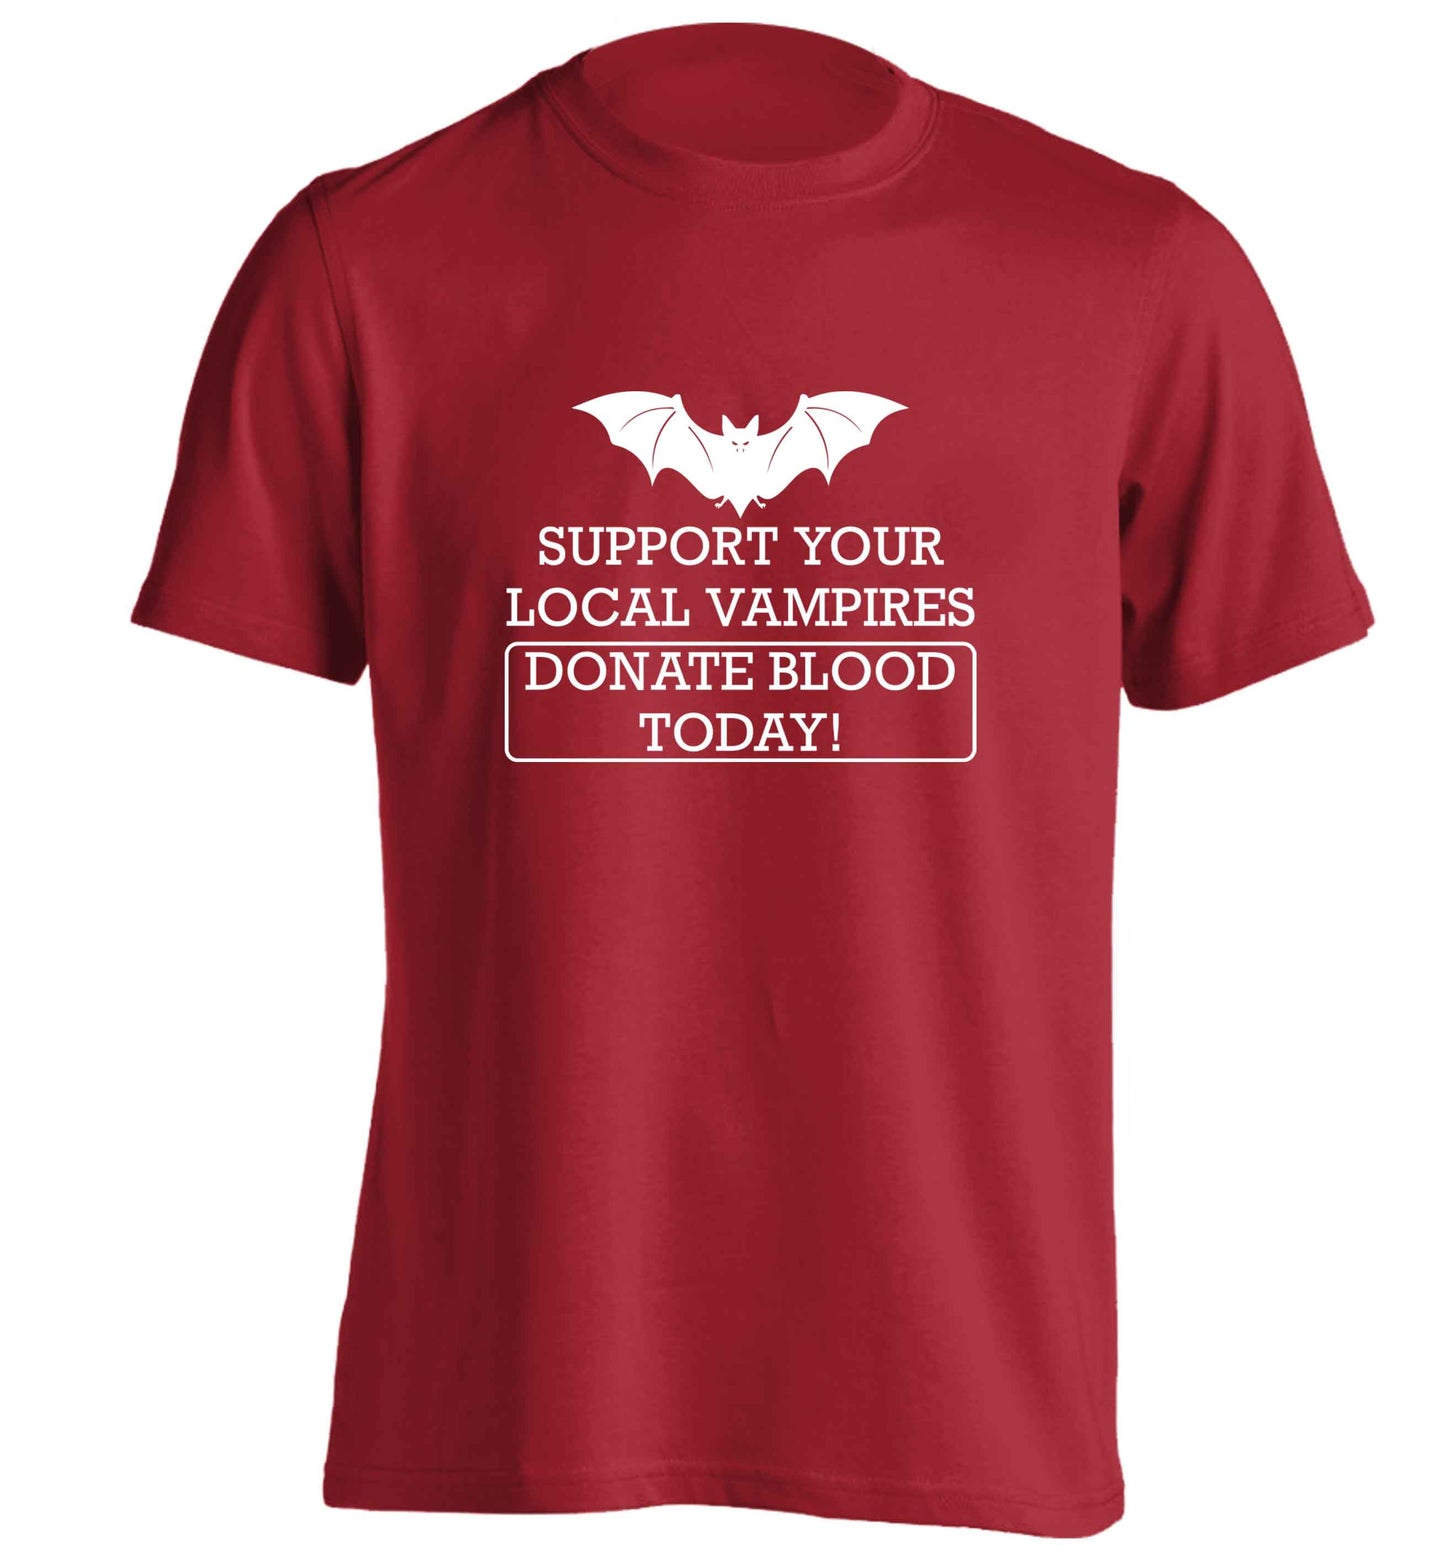 Support your local vampires donate blood today! adults unisex red Tshirt 2XL